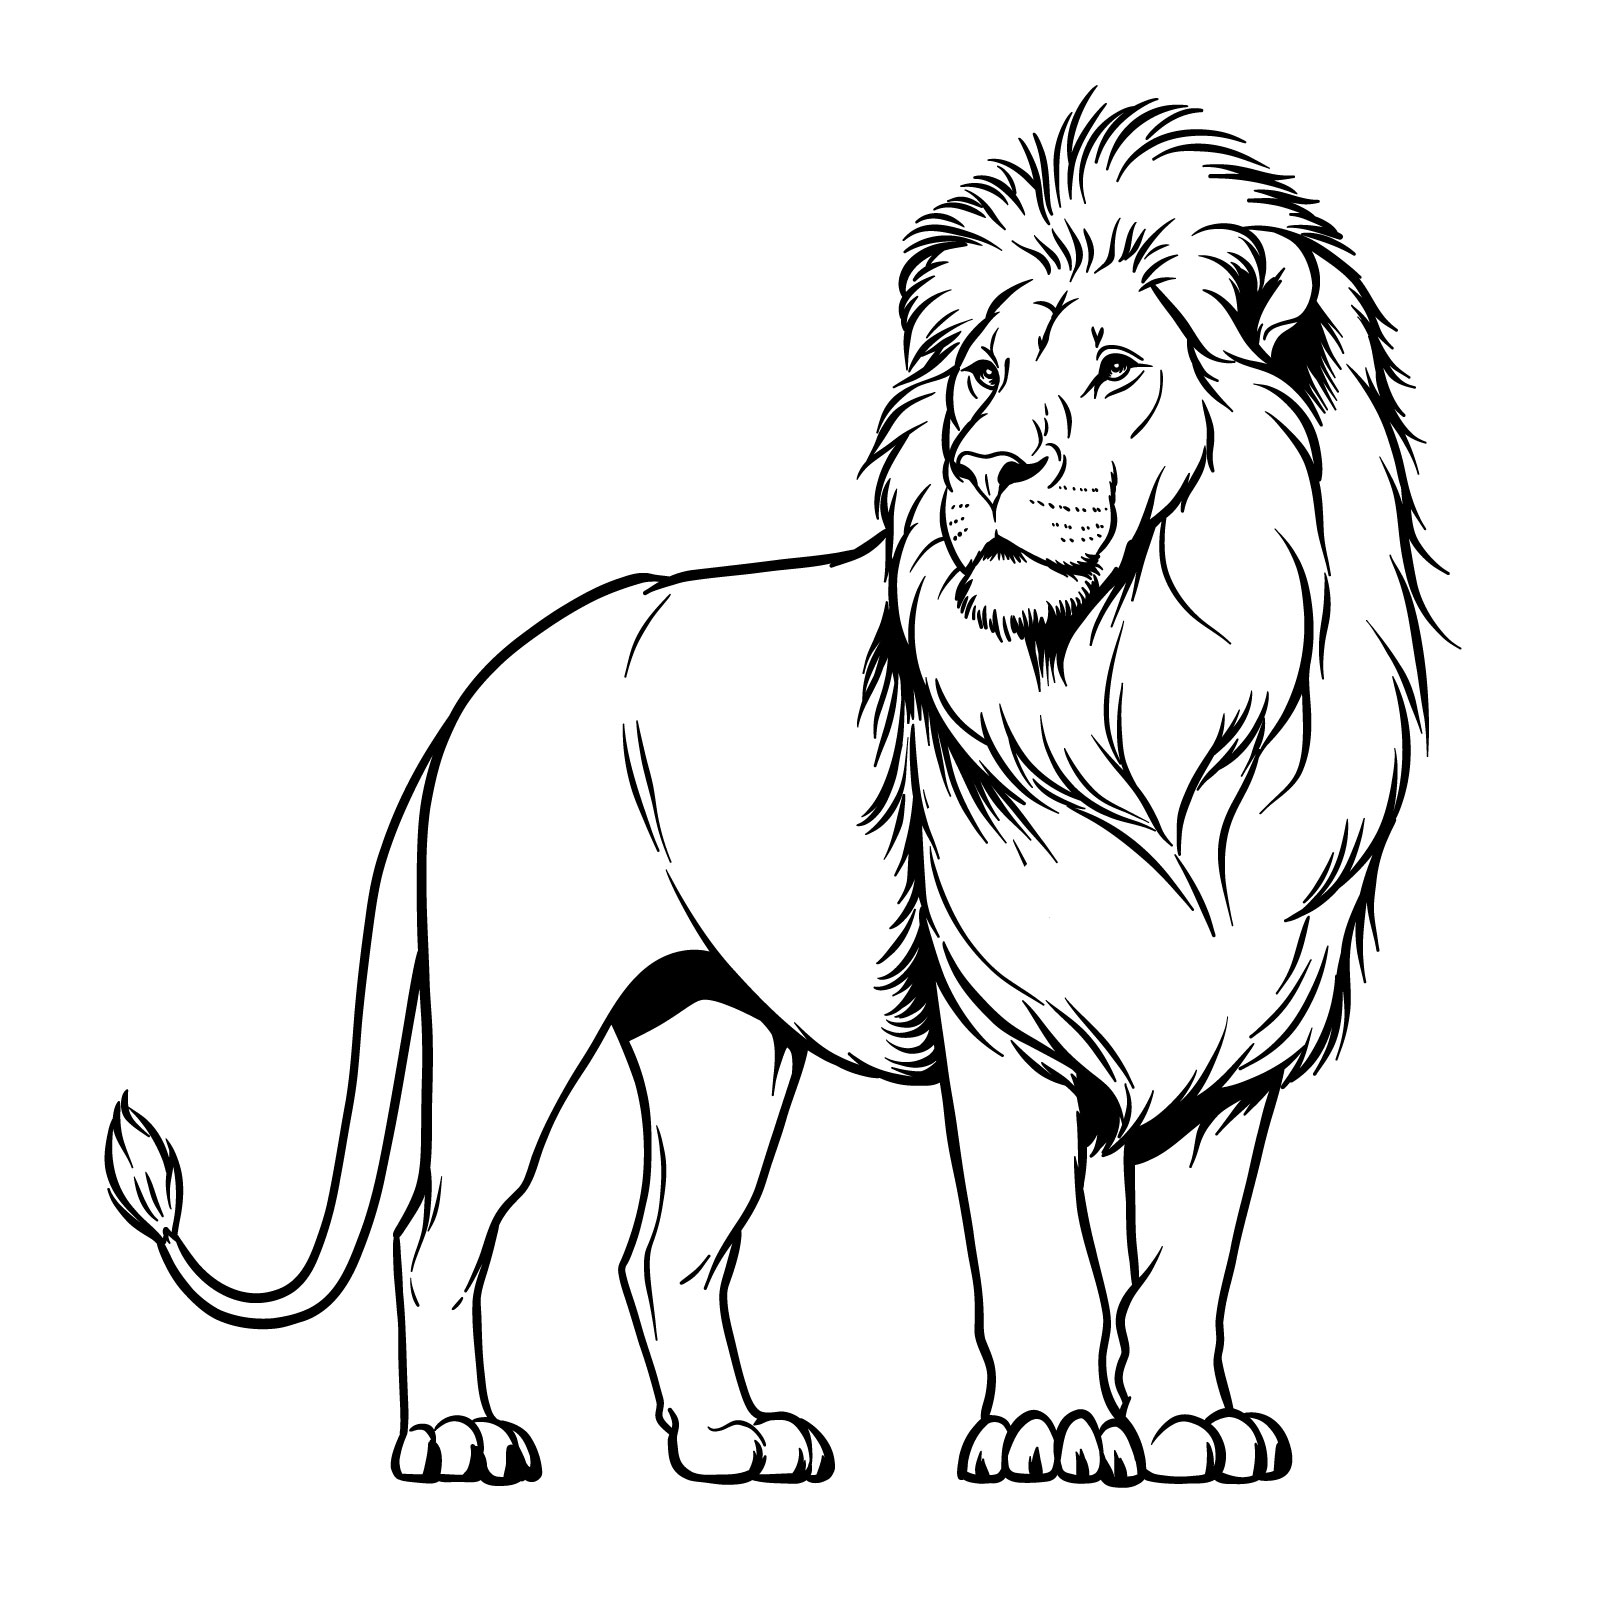 How to draw a lion - standing pose, 3/4 view, head turned